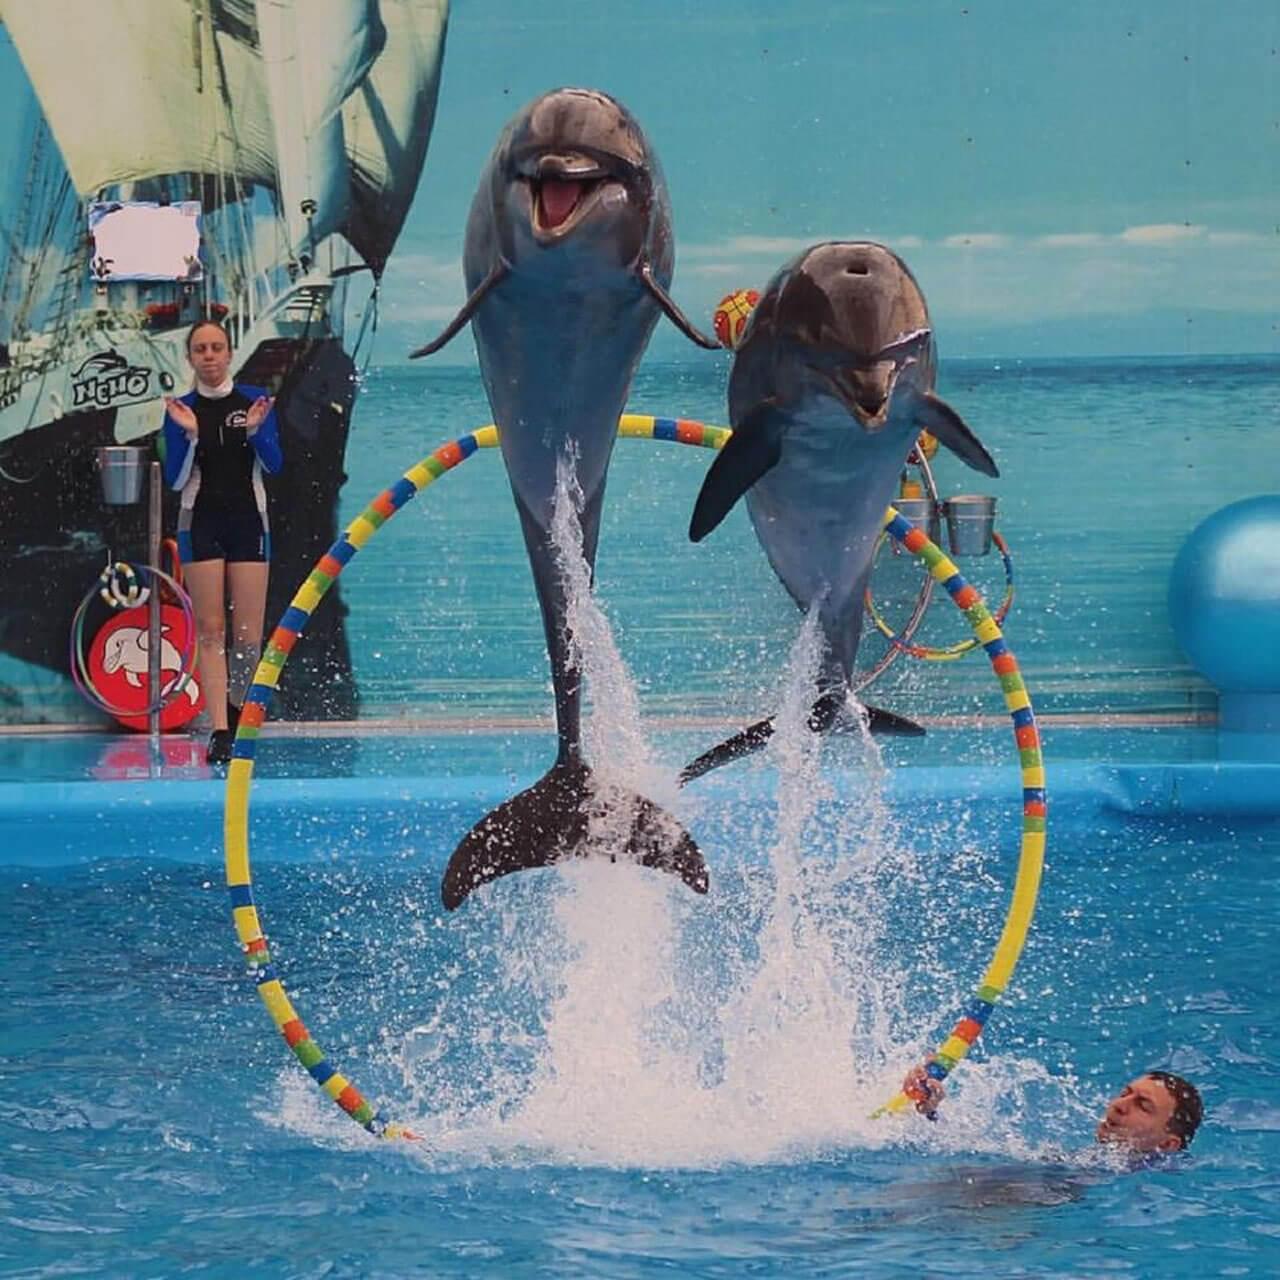 Skilful tricks performed by dolphins during the show